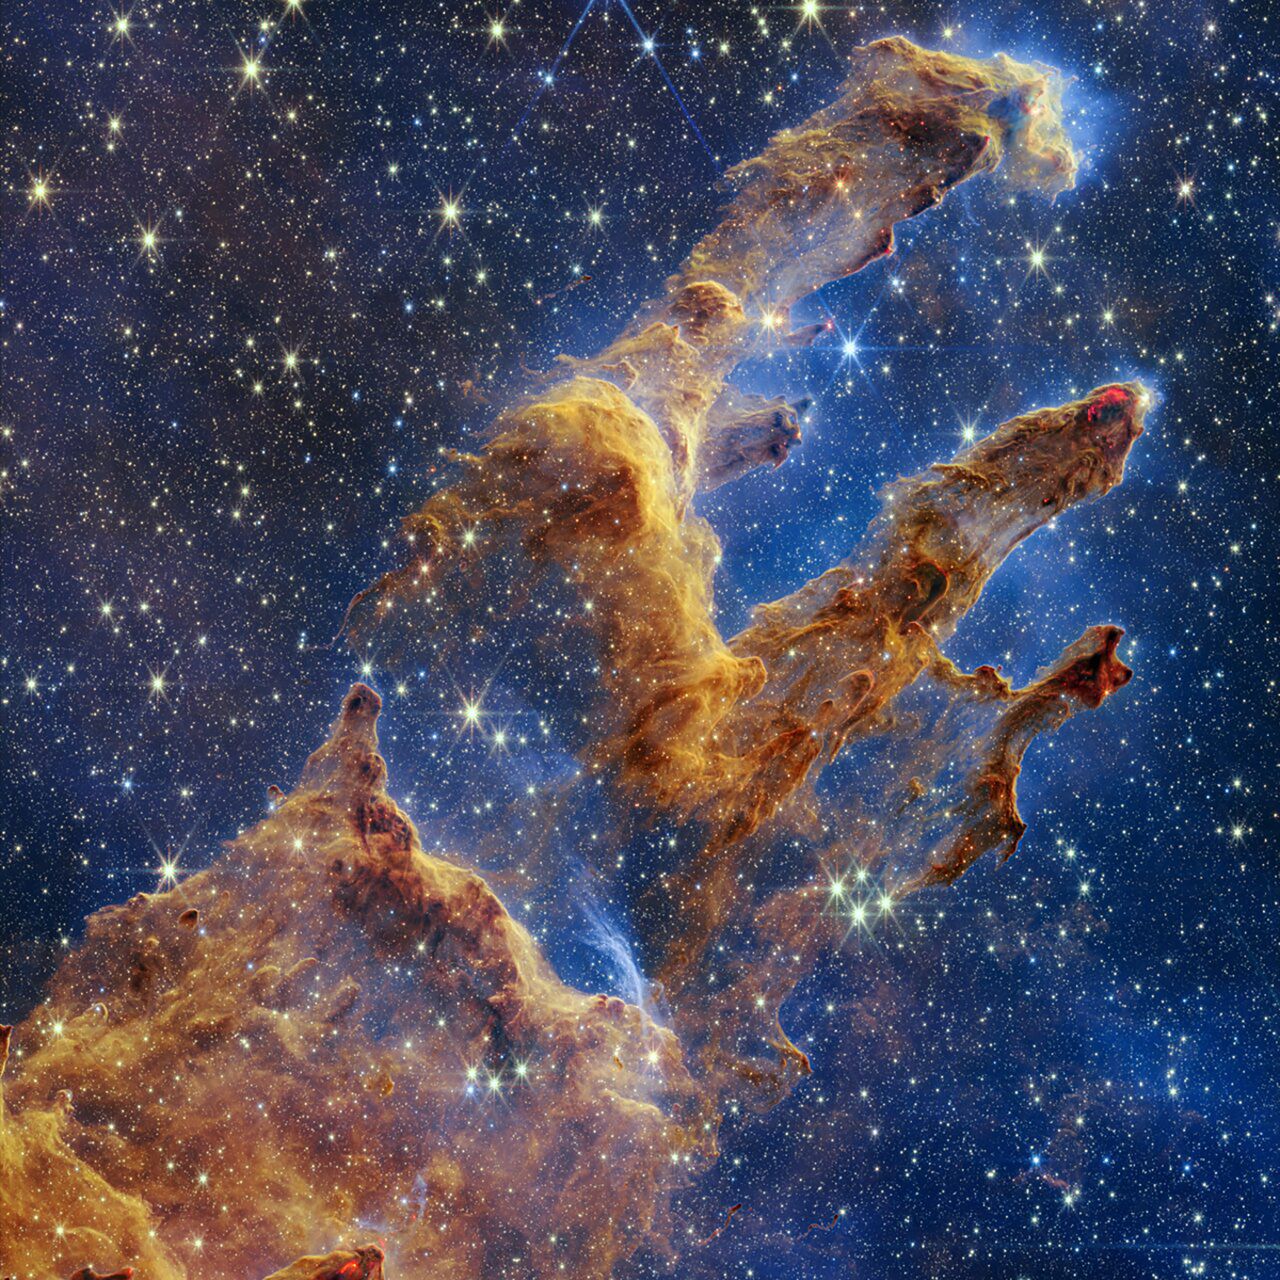 Webb captured a highly detailed snapshot of the so-called <a href="https://www.cnn.com/2022/10/19/world/webb-telescope-pillars-of-creation-scn/index.html" target="_blank">Pillars of Creation,</a> a vista of three looming towers made of interstellar dust and gas that's speckled with newly formed stars. The area, which lies within the Eagle Nebula about 6,500 light-years from Earth, had previously been captured by the Hubble Telescope in 1995, creating an image deemed "iconic" by space observers.